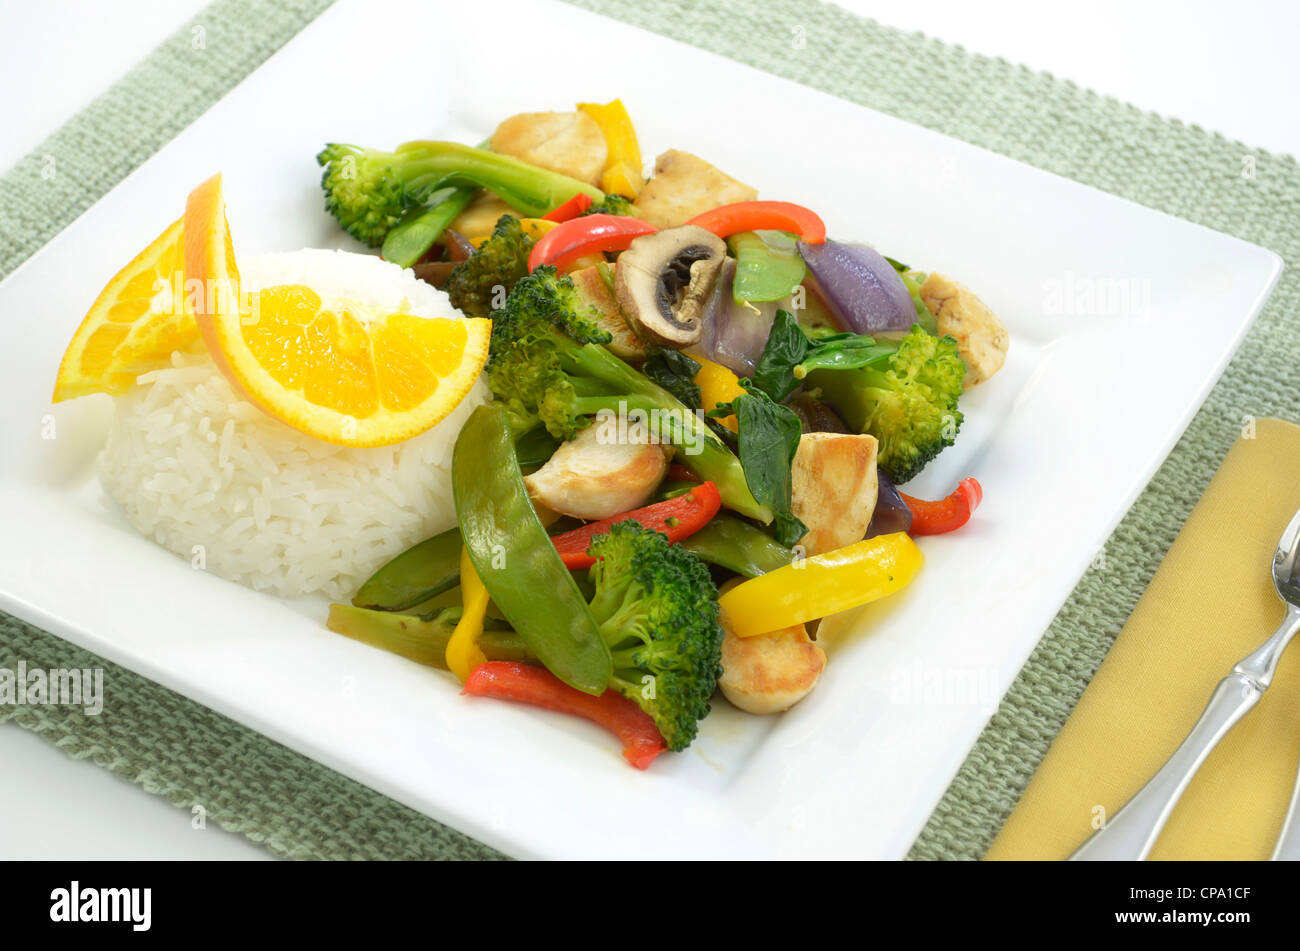 Chicken stir fry with rice on square white plate Stock Photo